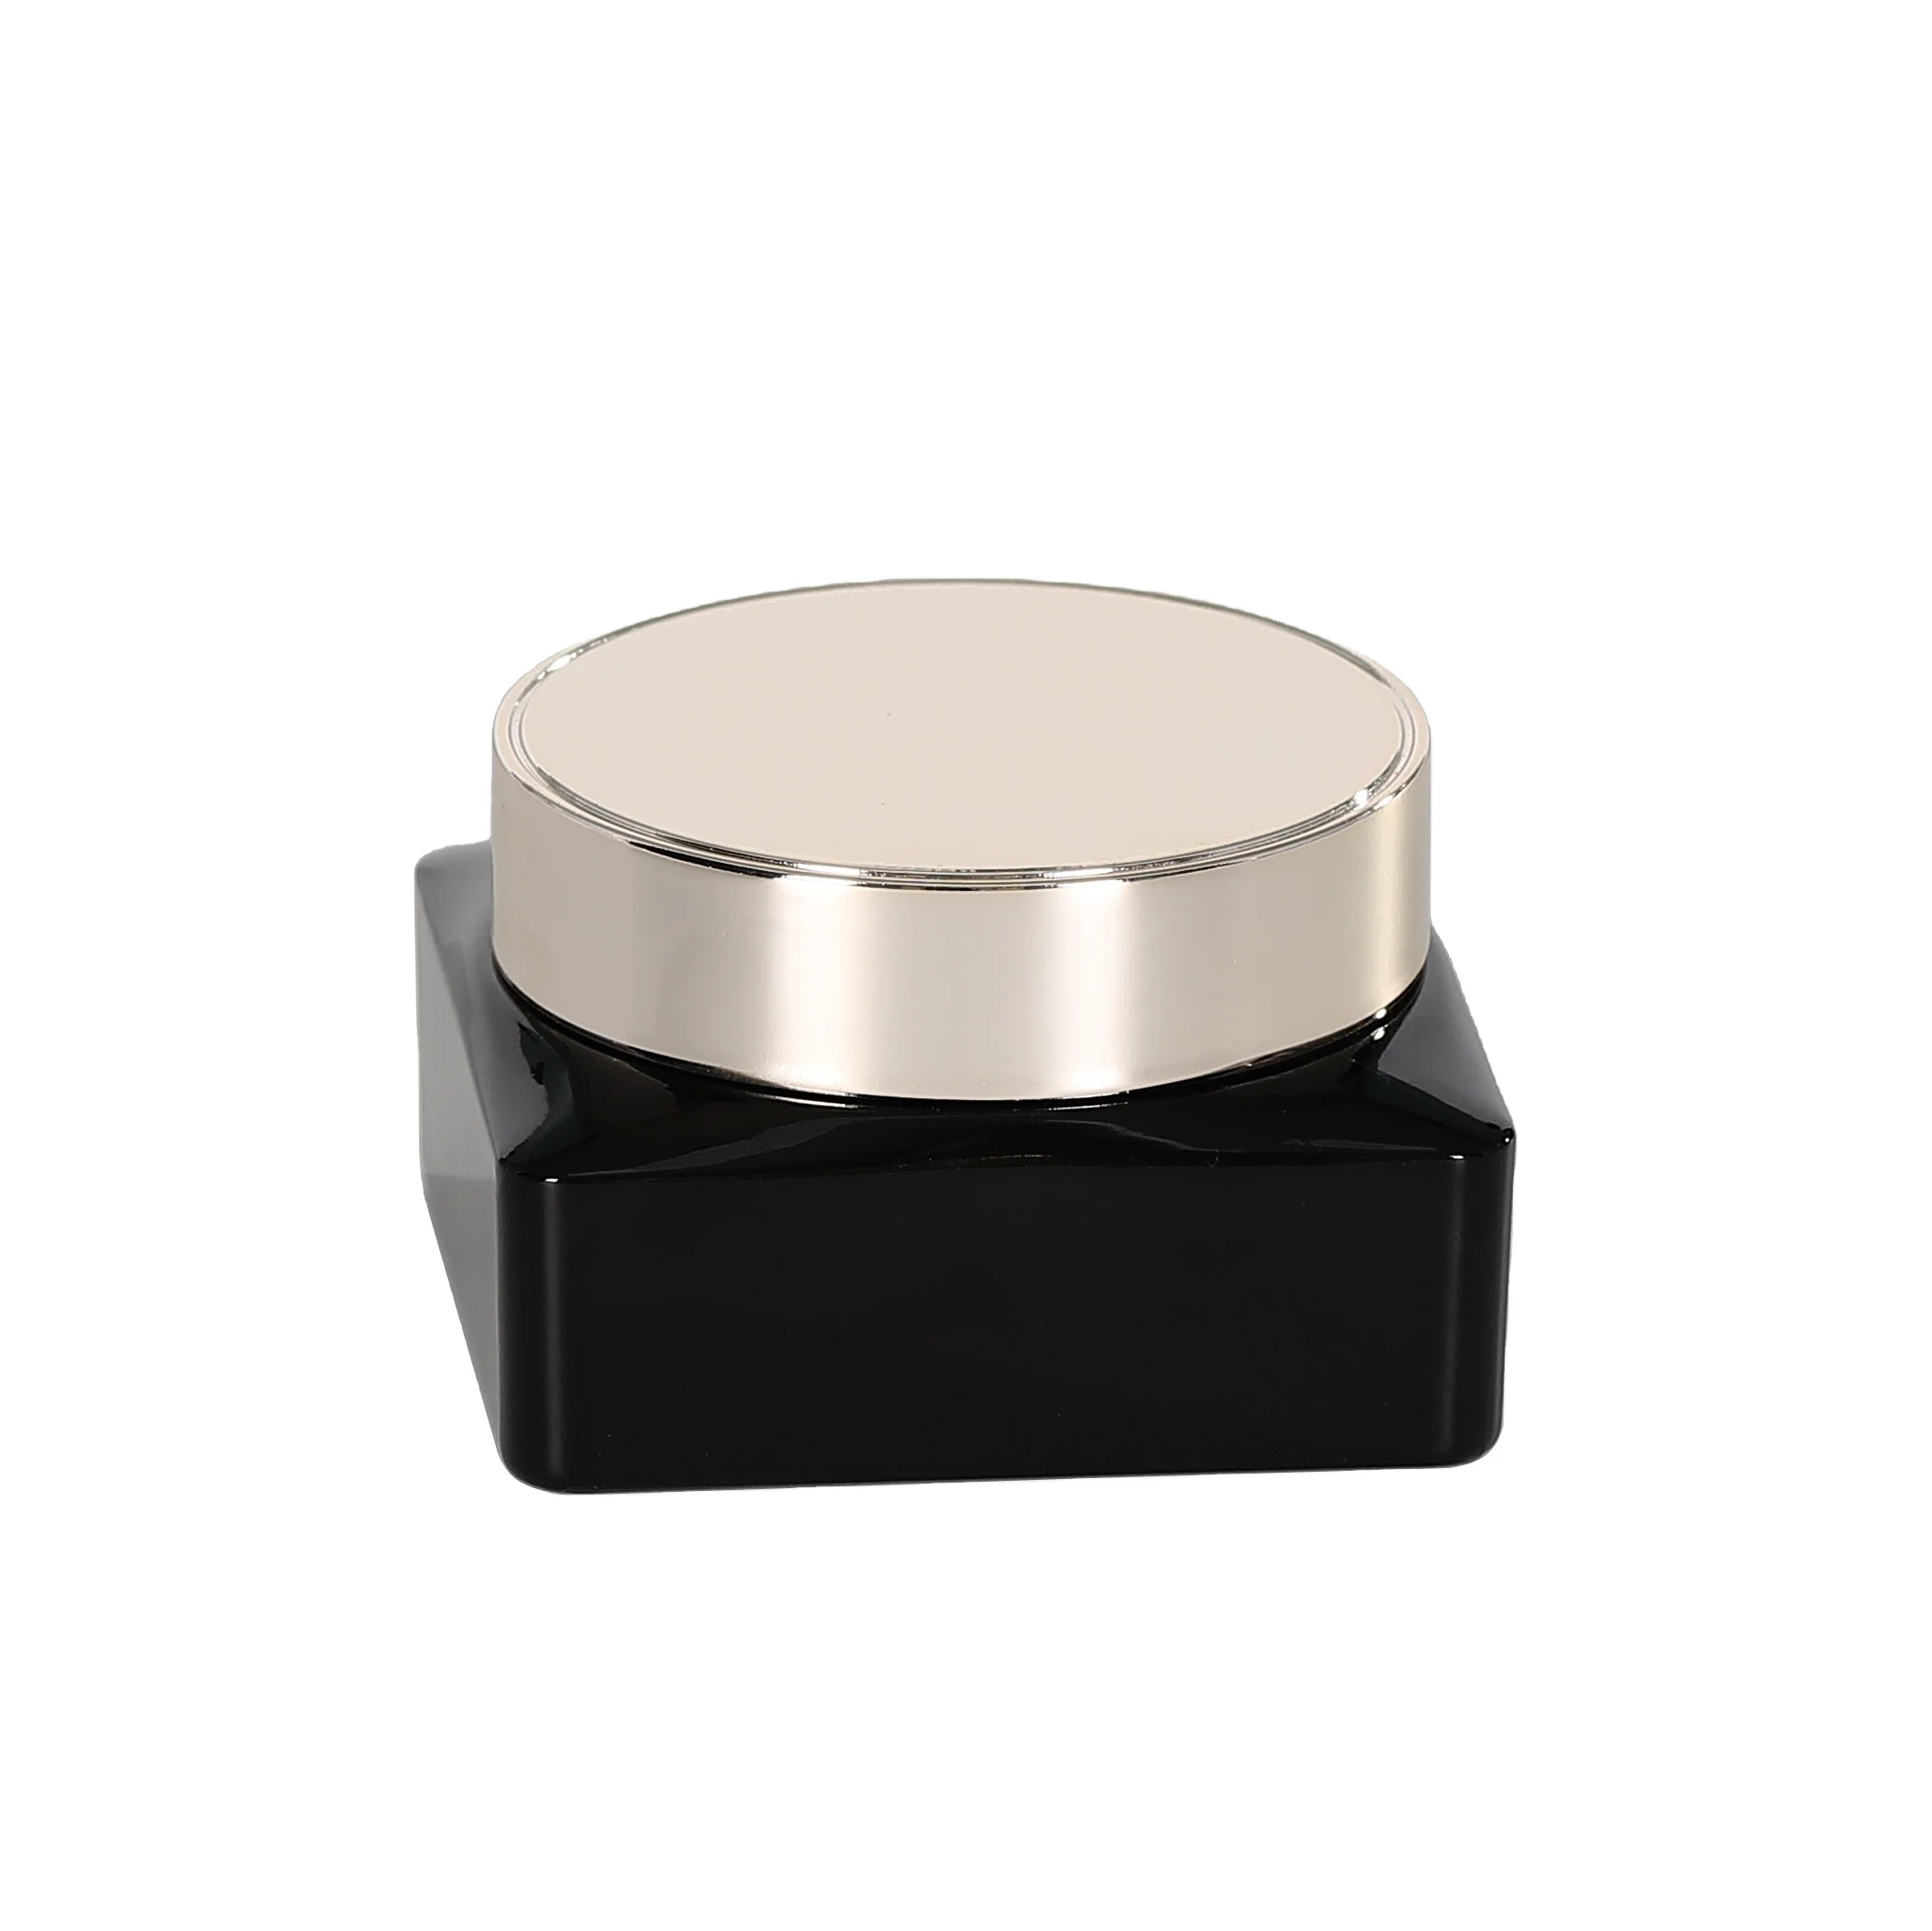 Square  pretty empty air cushion compact powder case 15G  foundation container for make up